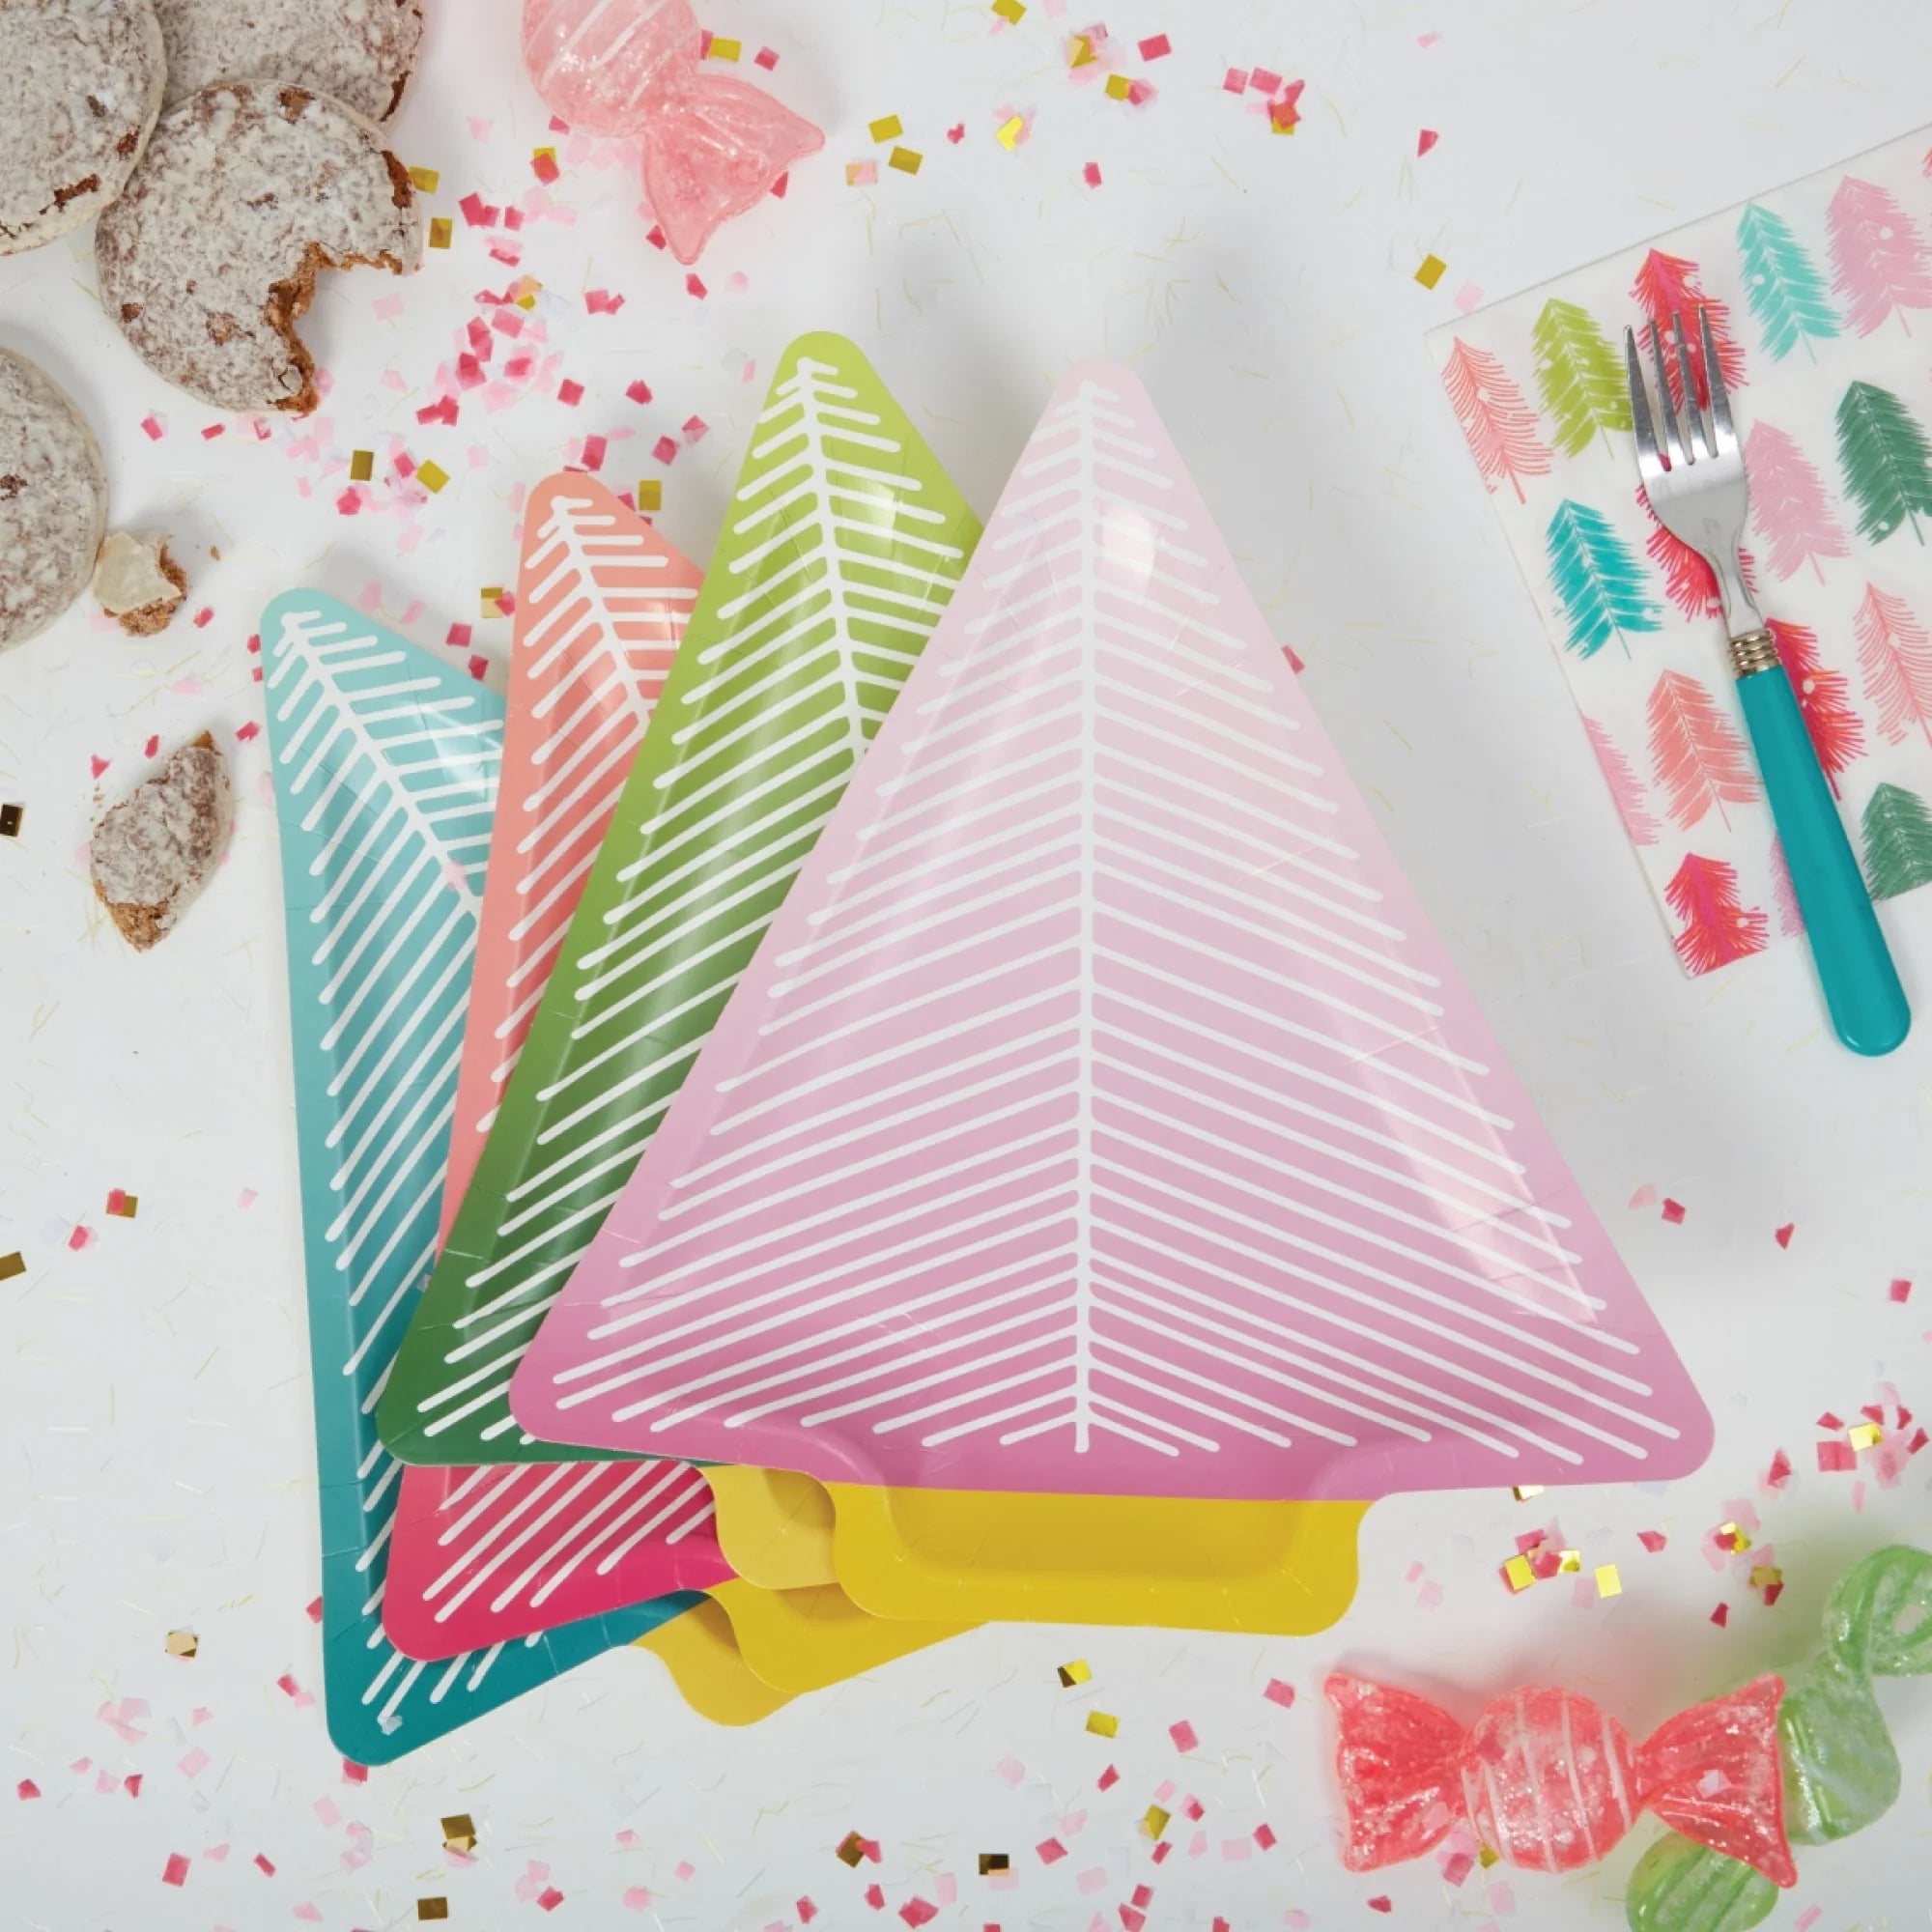 Merry and Bright Christmas Tree Plates | The Party Darling